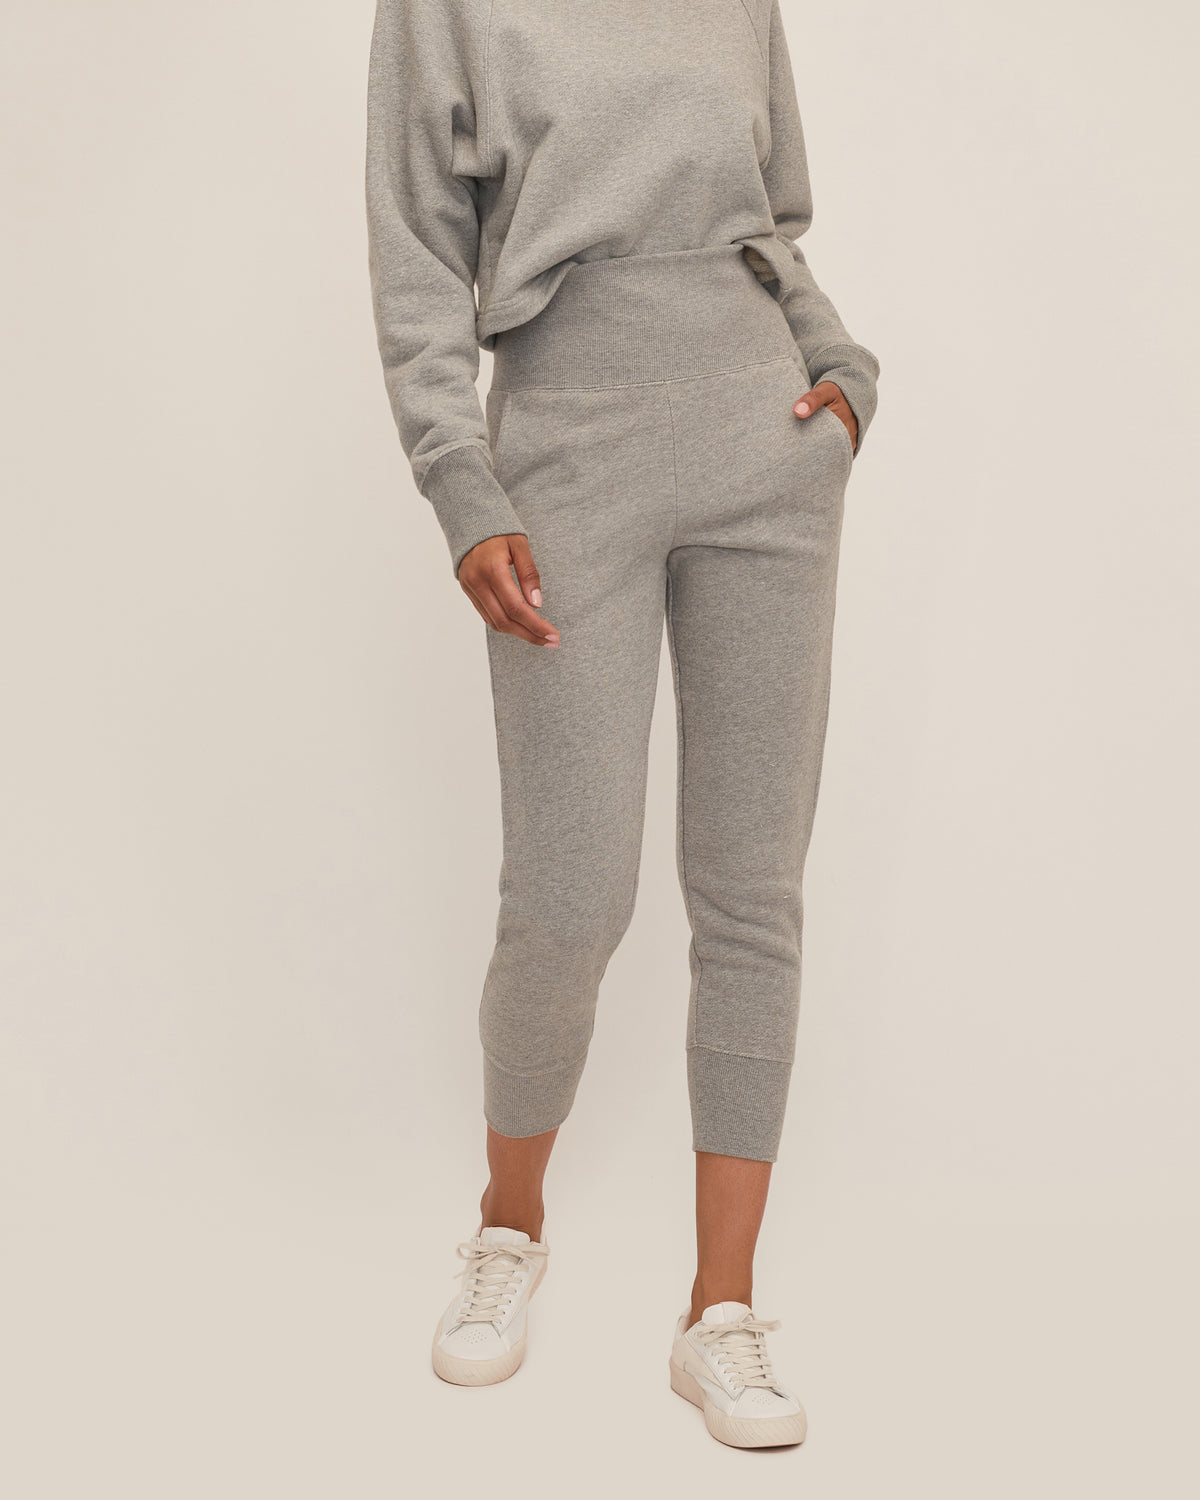 So High Waisted French Terry Sweatpants in Heather Grey, MARISSA WEBB